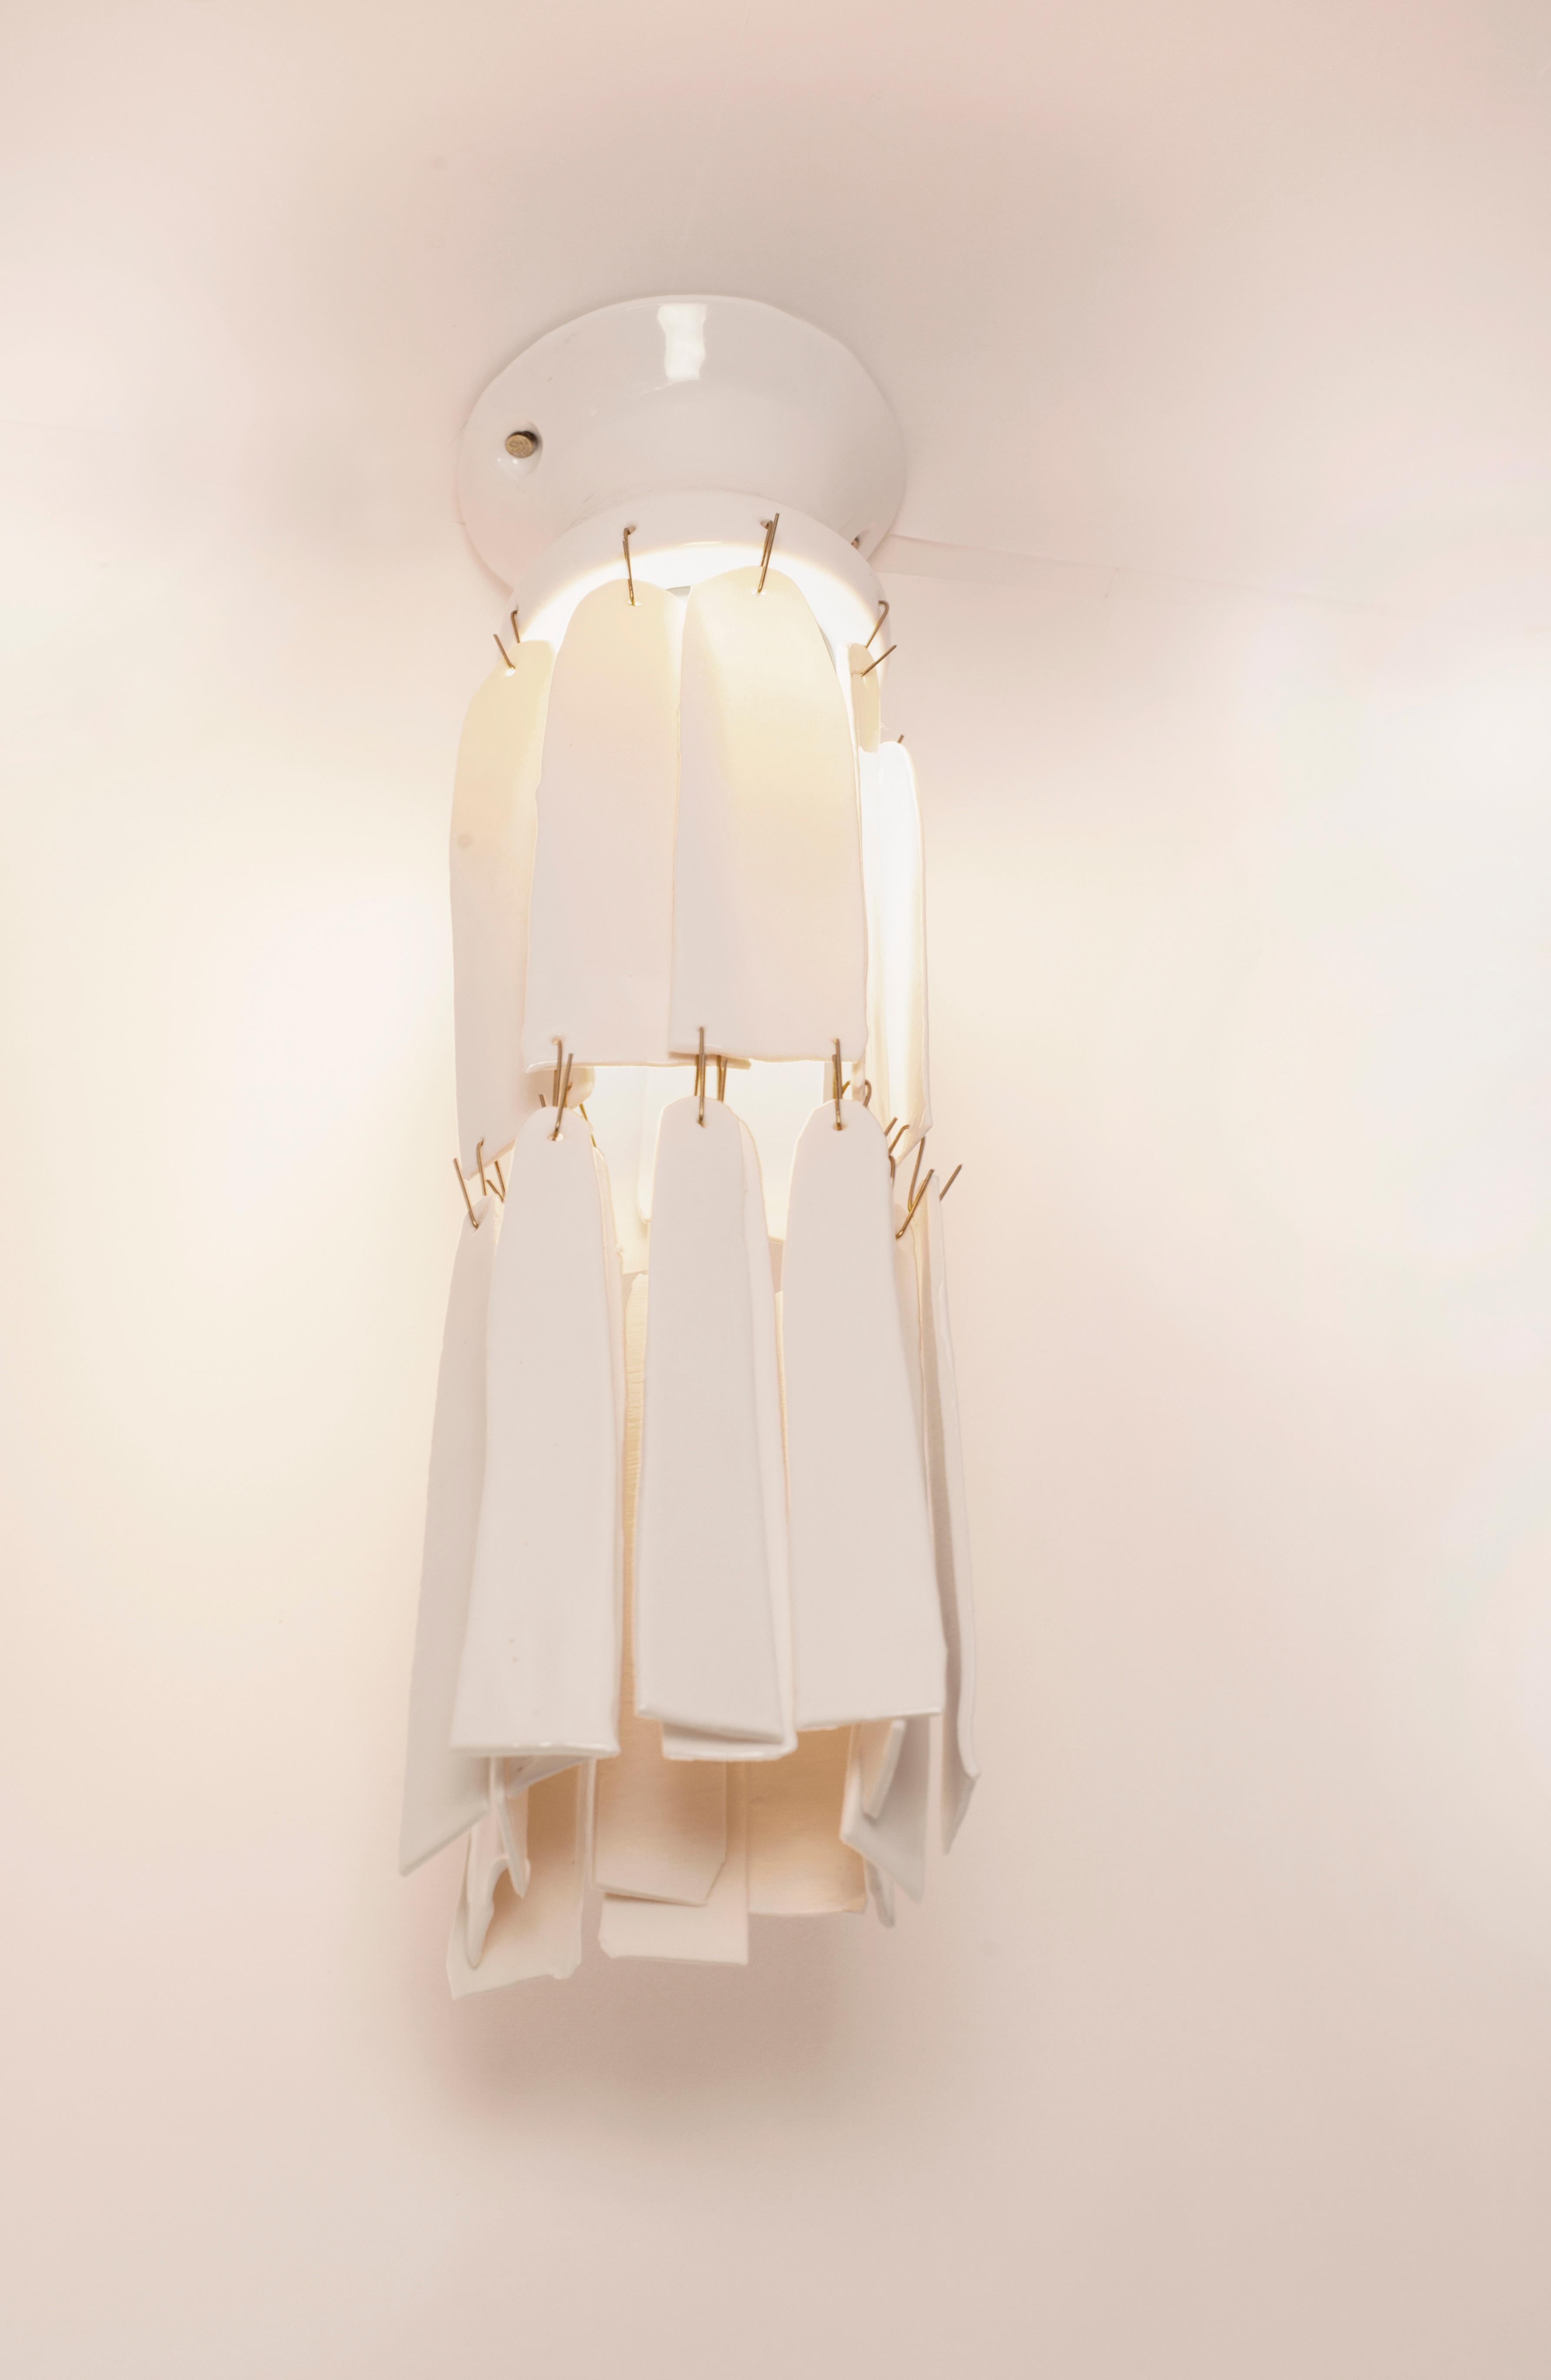 White lamp with hanging elements that reflect the light on the wall and ceiling. White Porcelain with White Glossy Glaze and Brass Hooks.